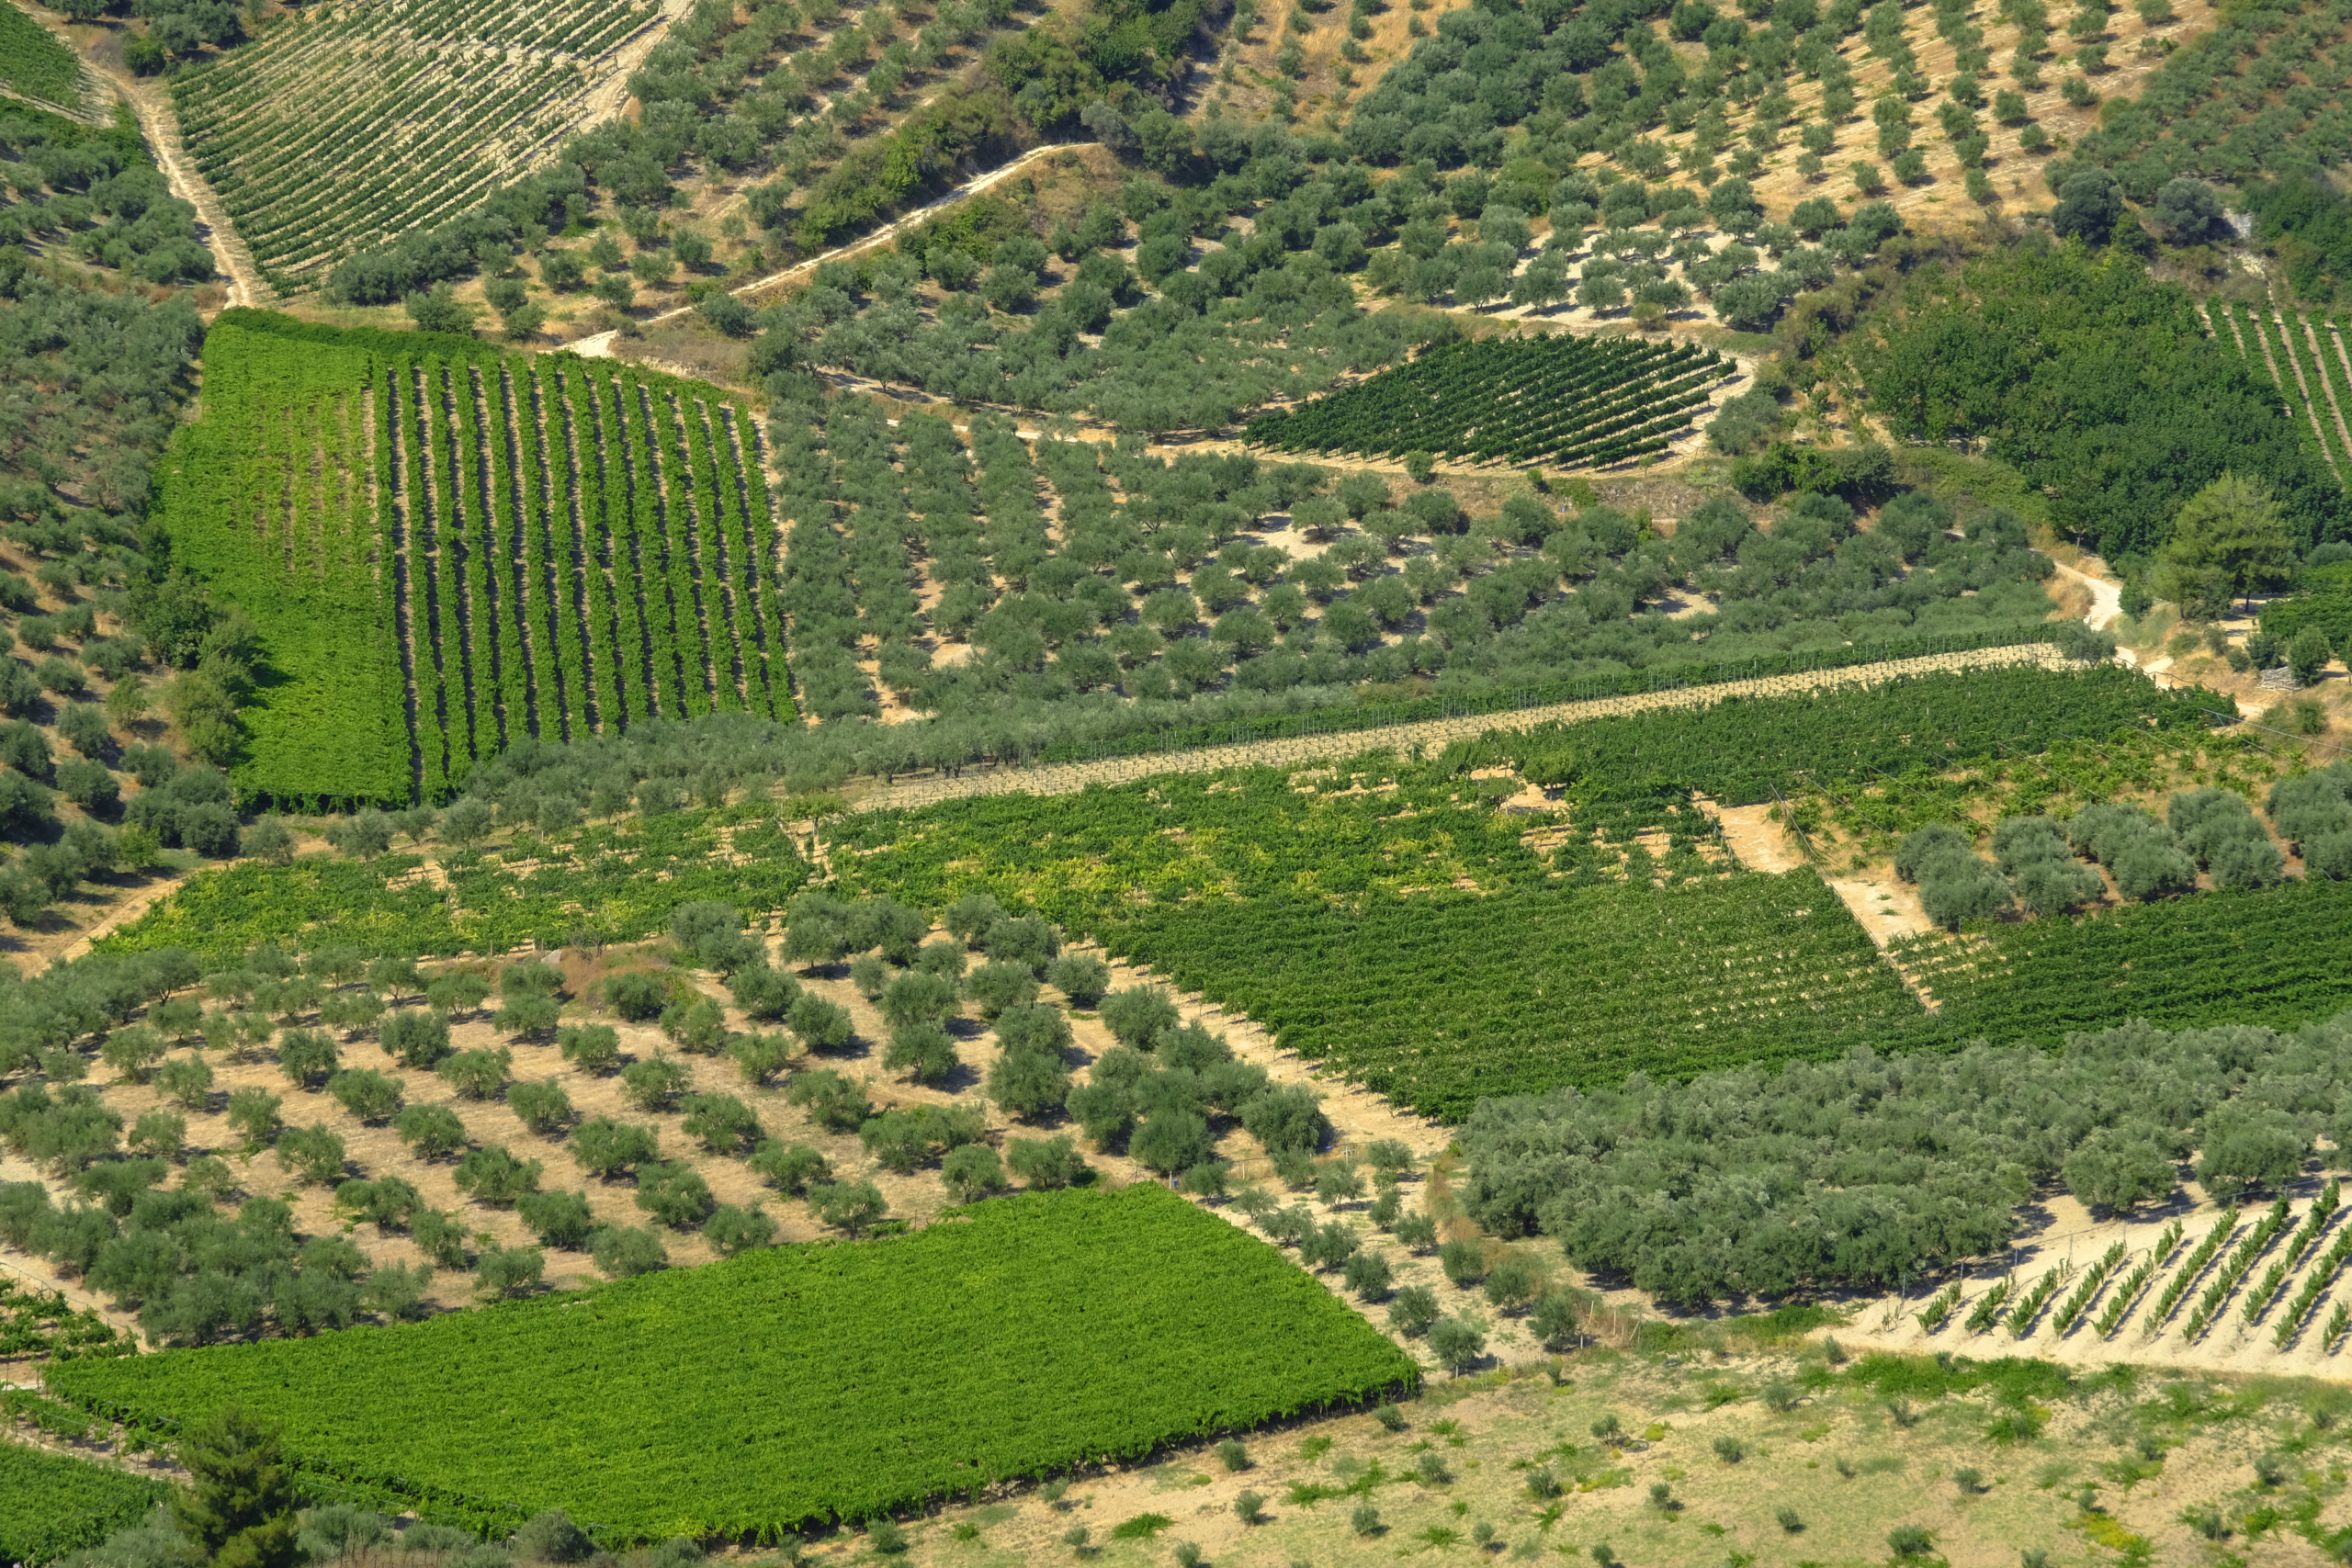 Article: Inside the Evolution of Crete’s Wine Industry